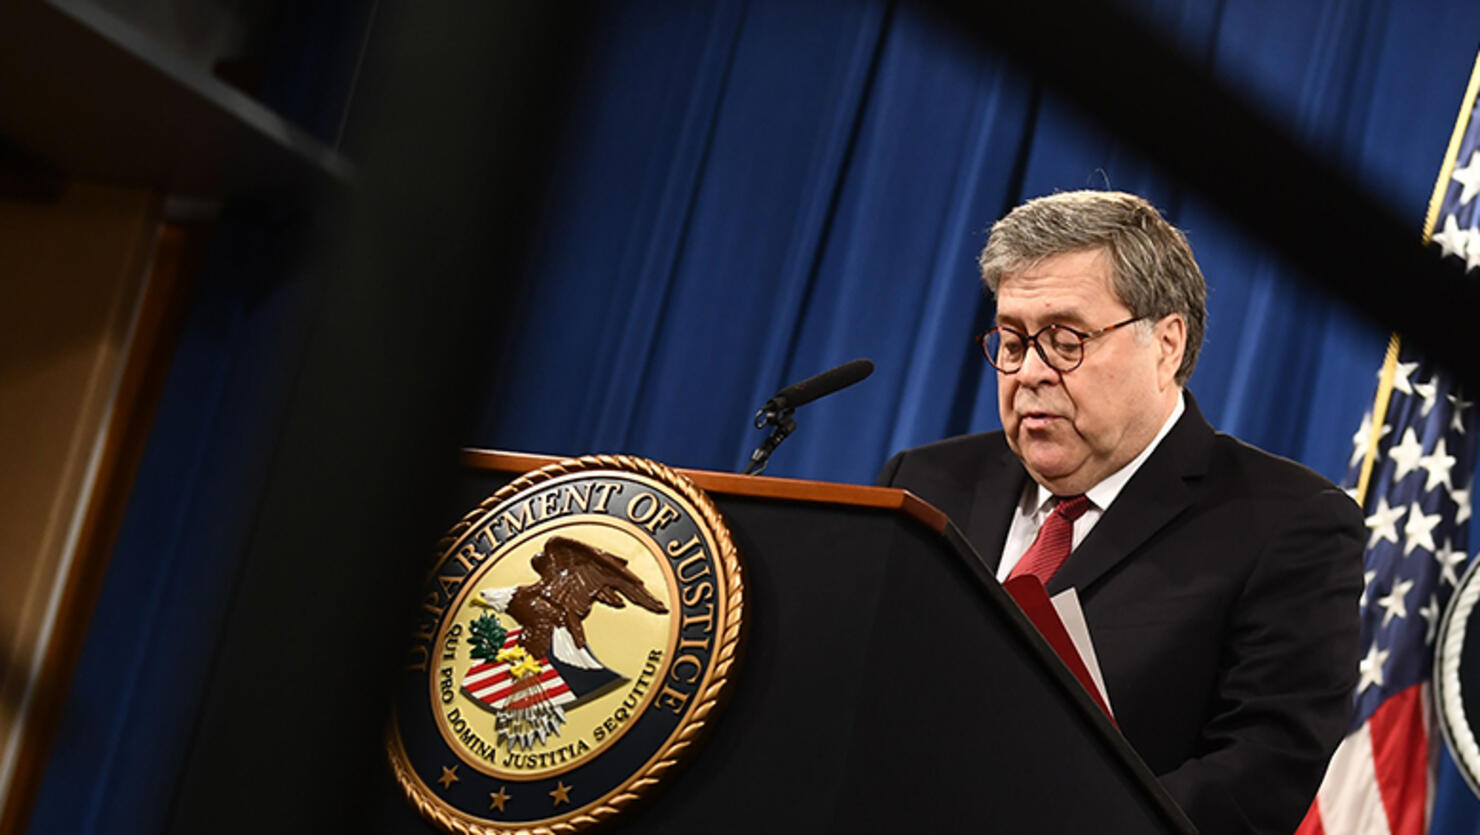 US Attorney General William Barr(L) speaks about the release of the Mueller Report at the Department of Justice April 18, 2019, in Washington, DC as US Deputy Attorney General Rod Rosenstein looks on. - The Mueller report on Russian interference in the 20